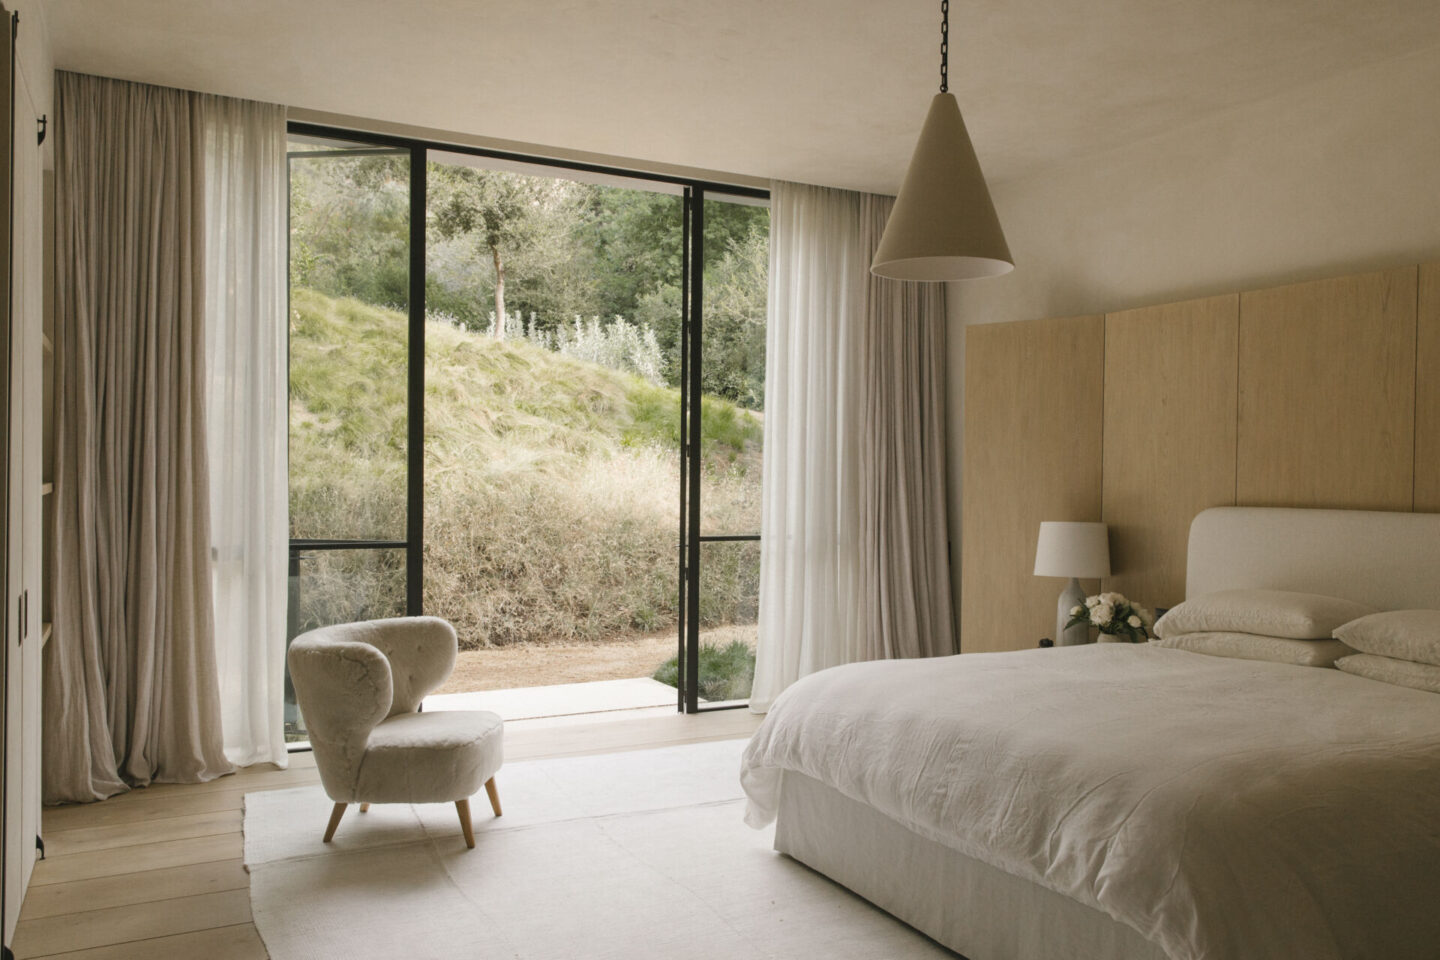 Quietly serene bedroom in Pacific Natural at Home - Jenni Kayne. #pacificnatural #interiordesign #minimalbedroom